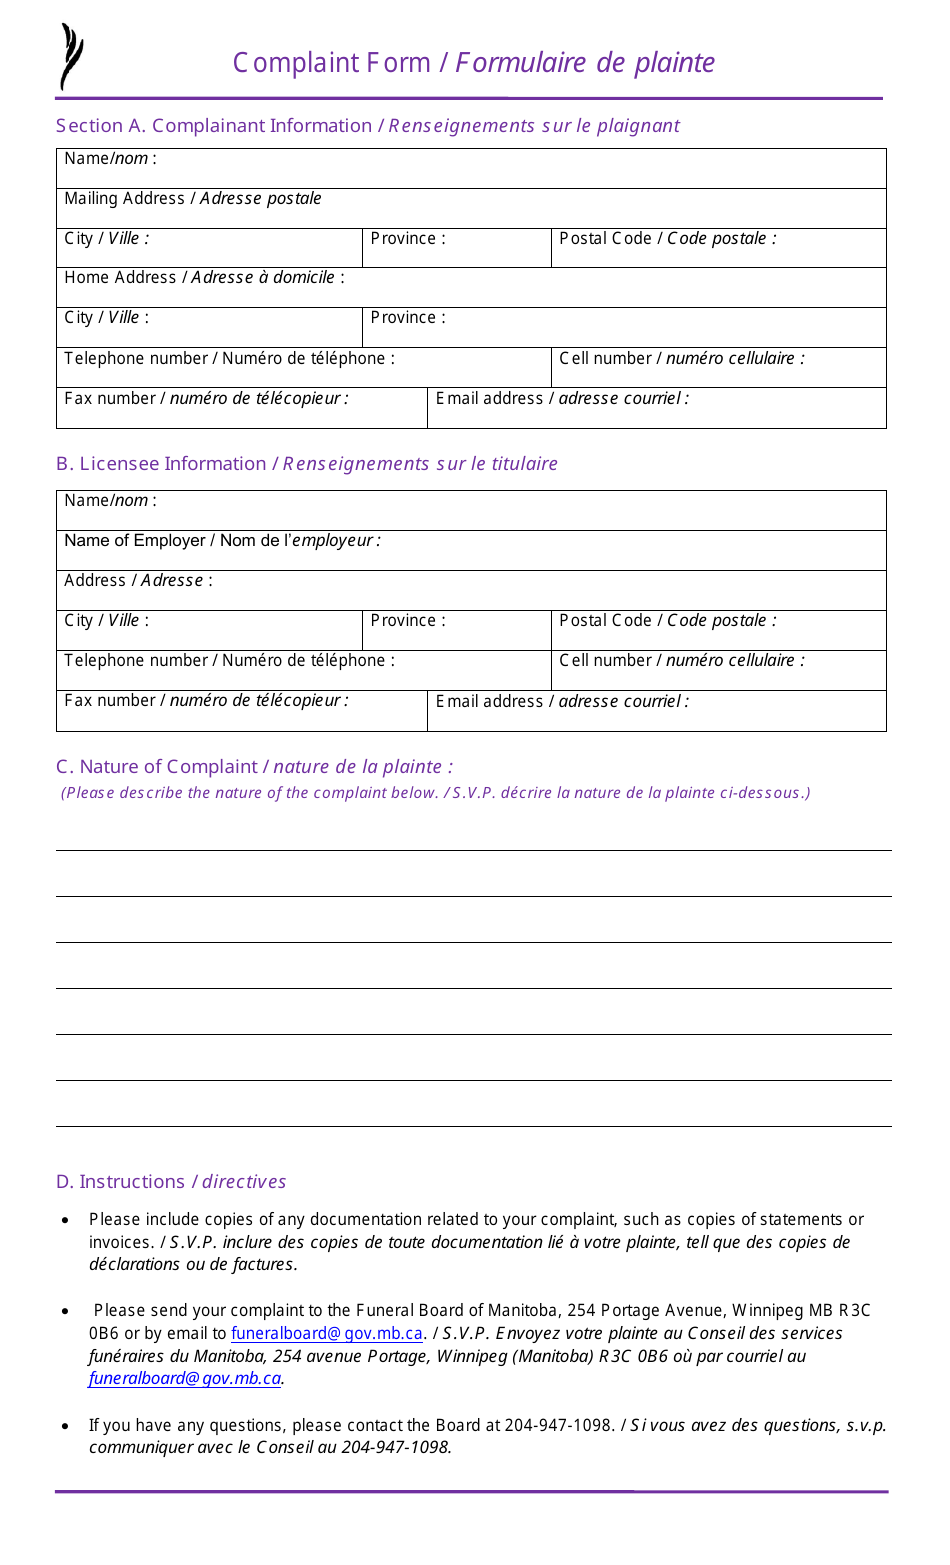 Complaint Form - Manitoba, Canada (English / French), Page 1